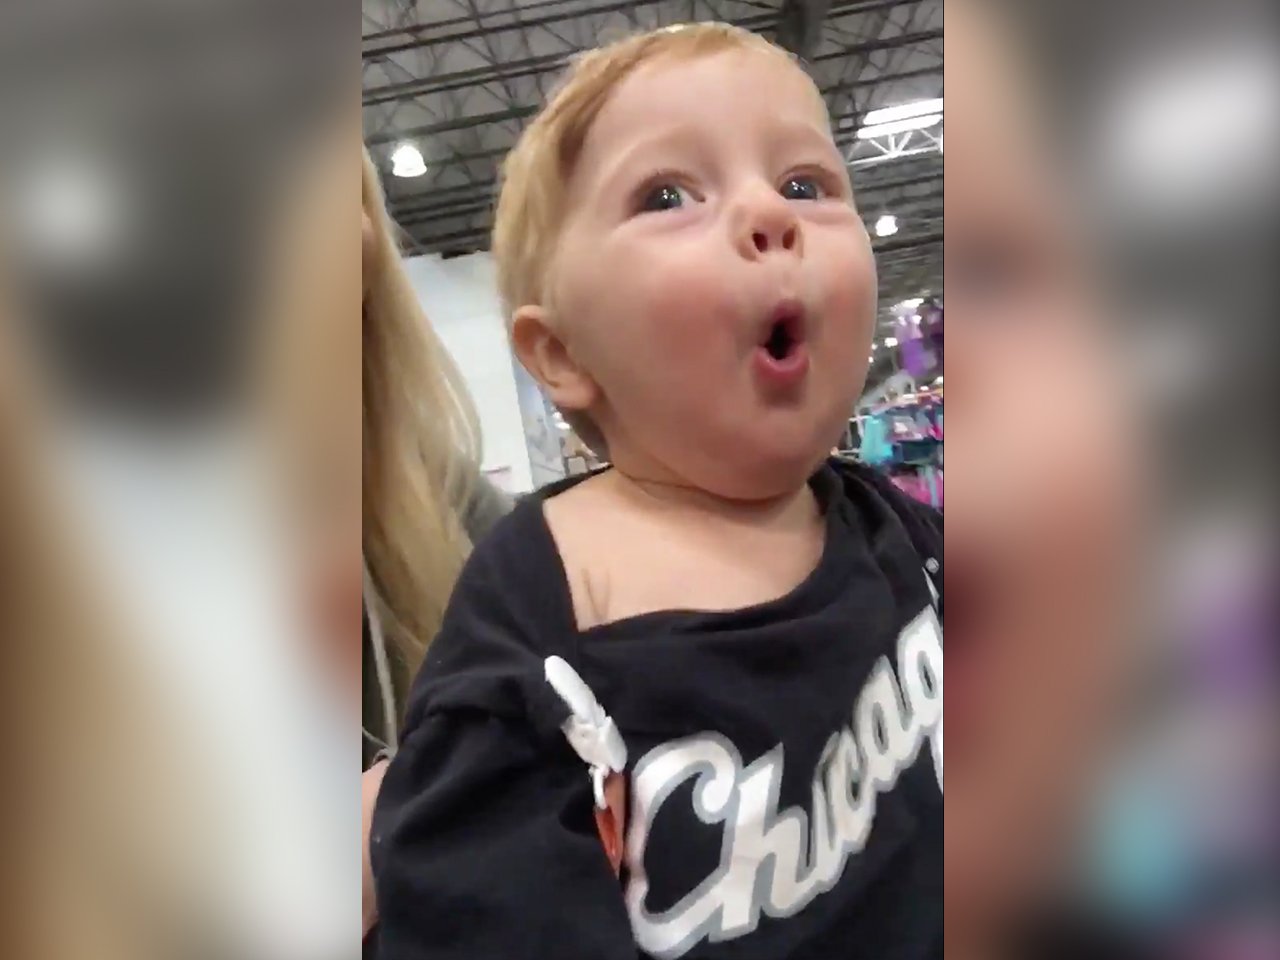 Baby excited about Christmas